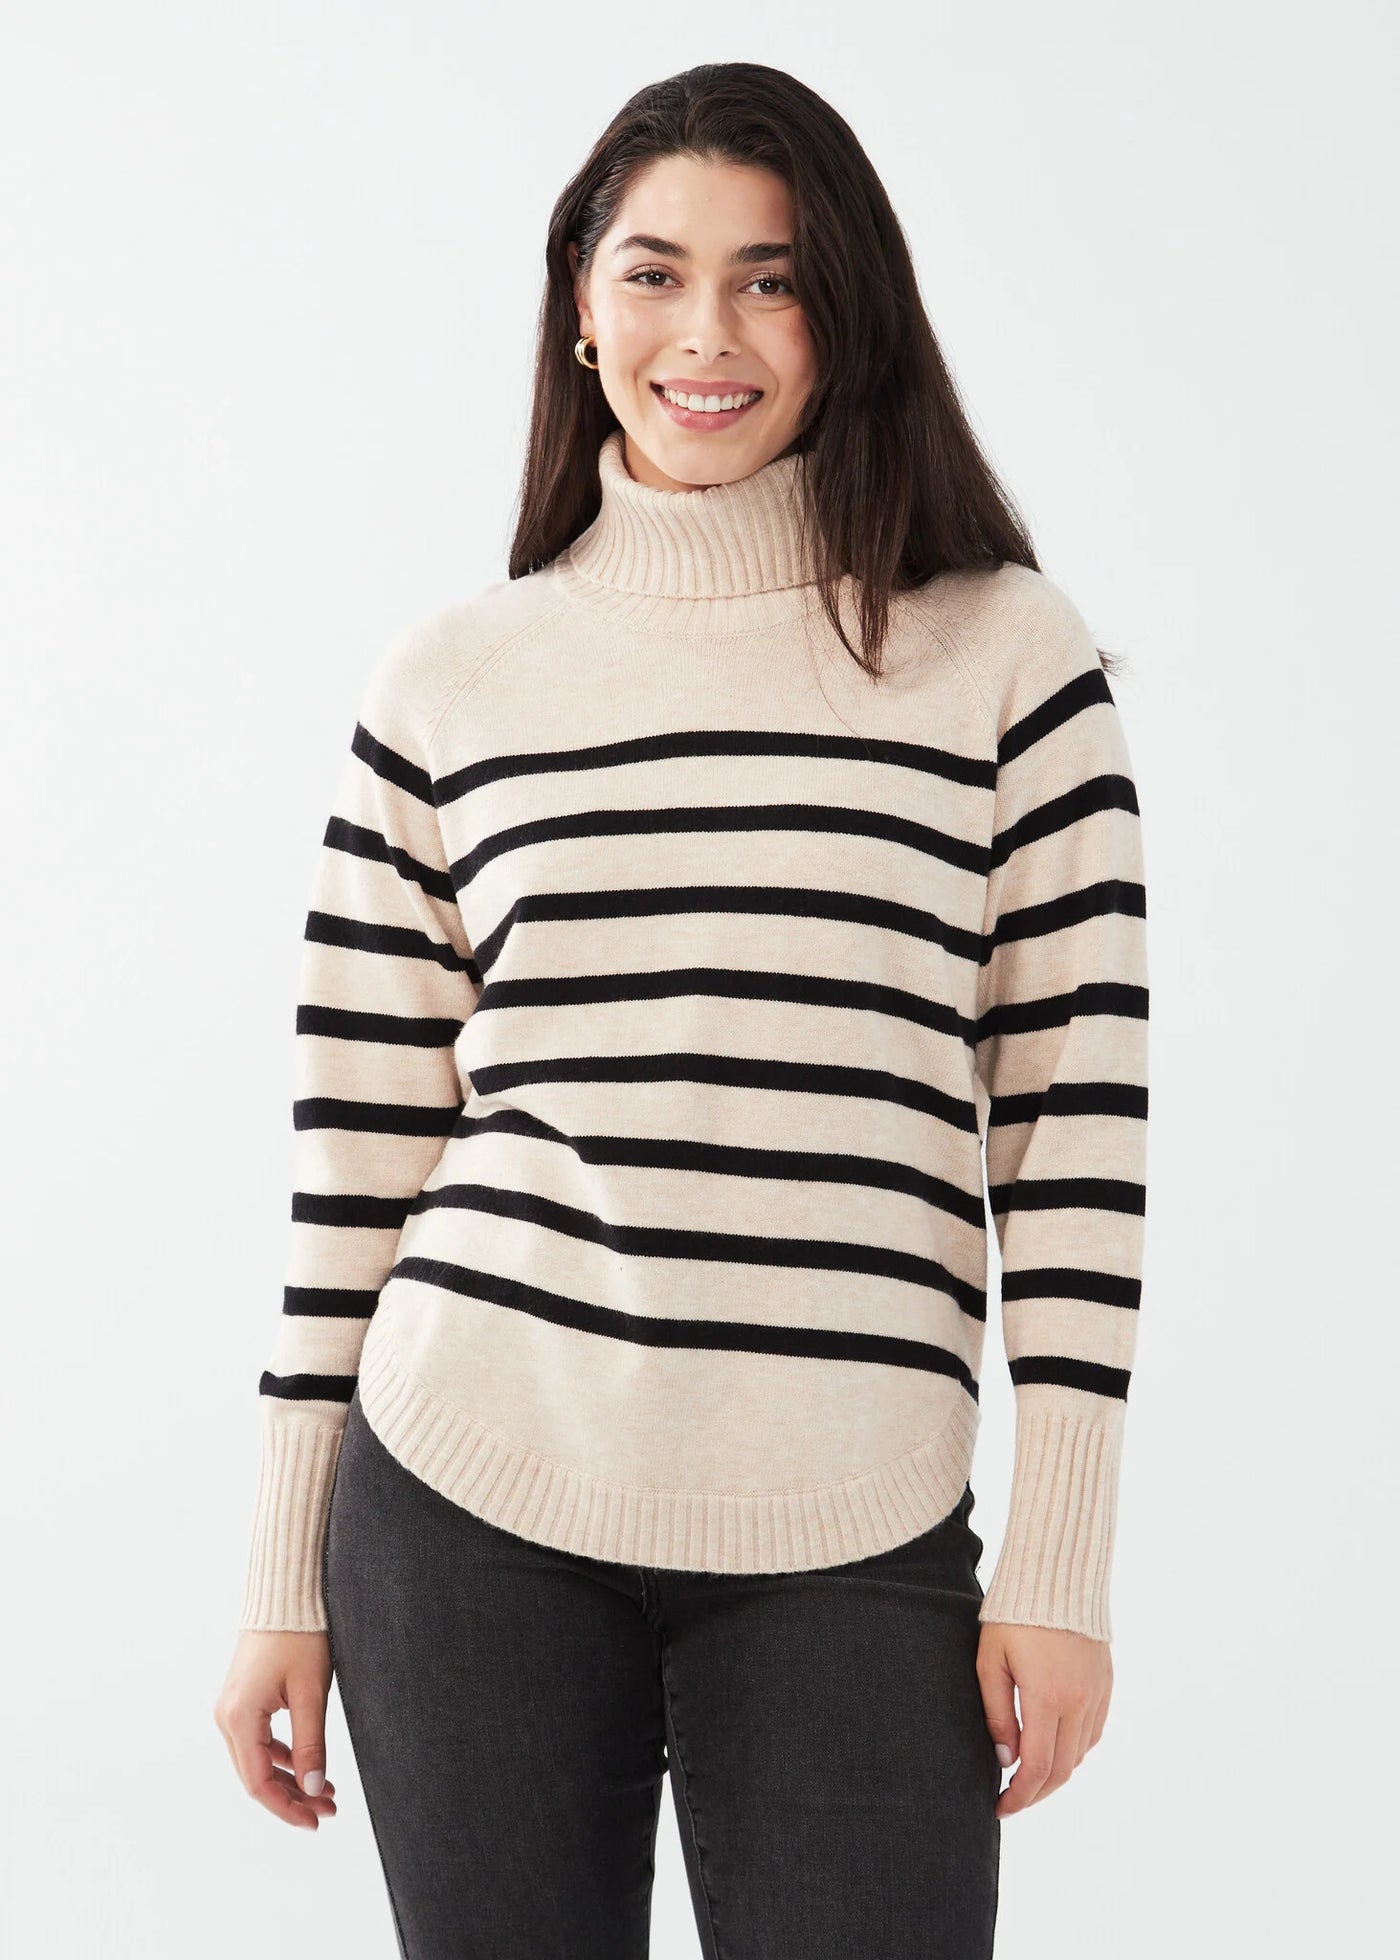 French Dressing Jeans Striped Sweater 